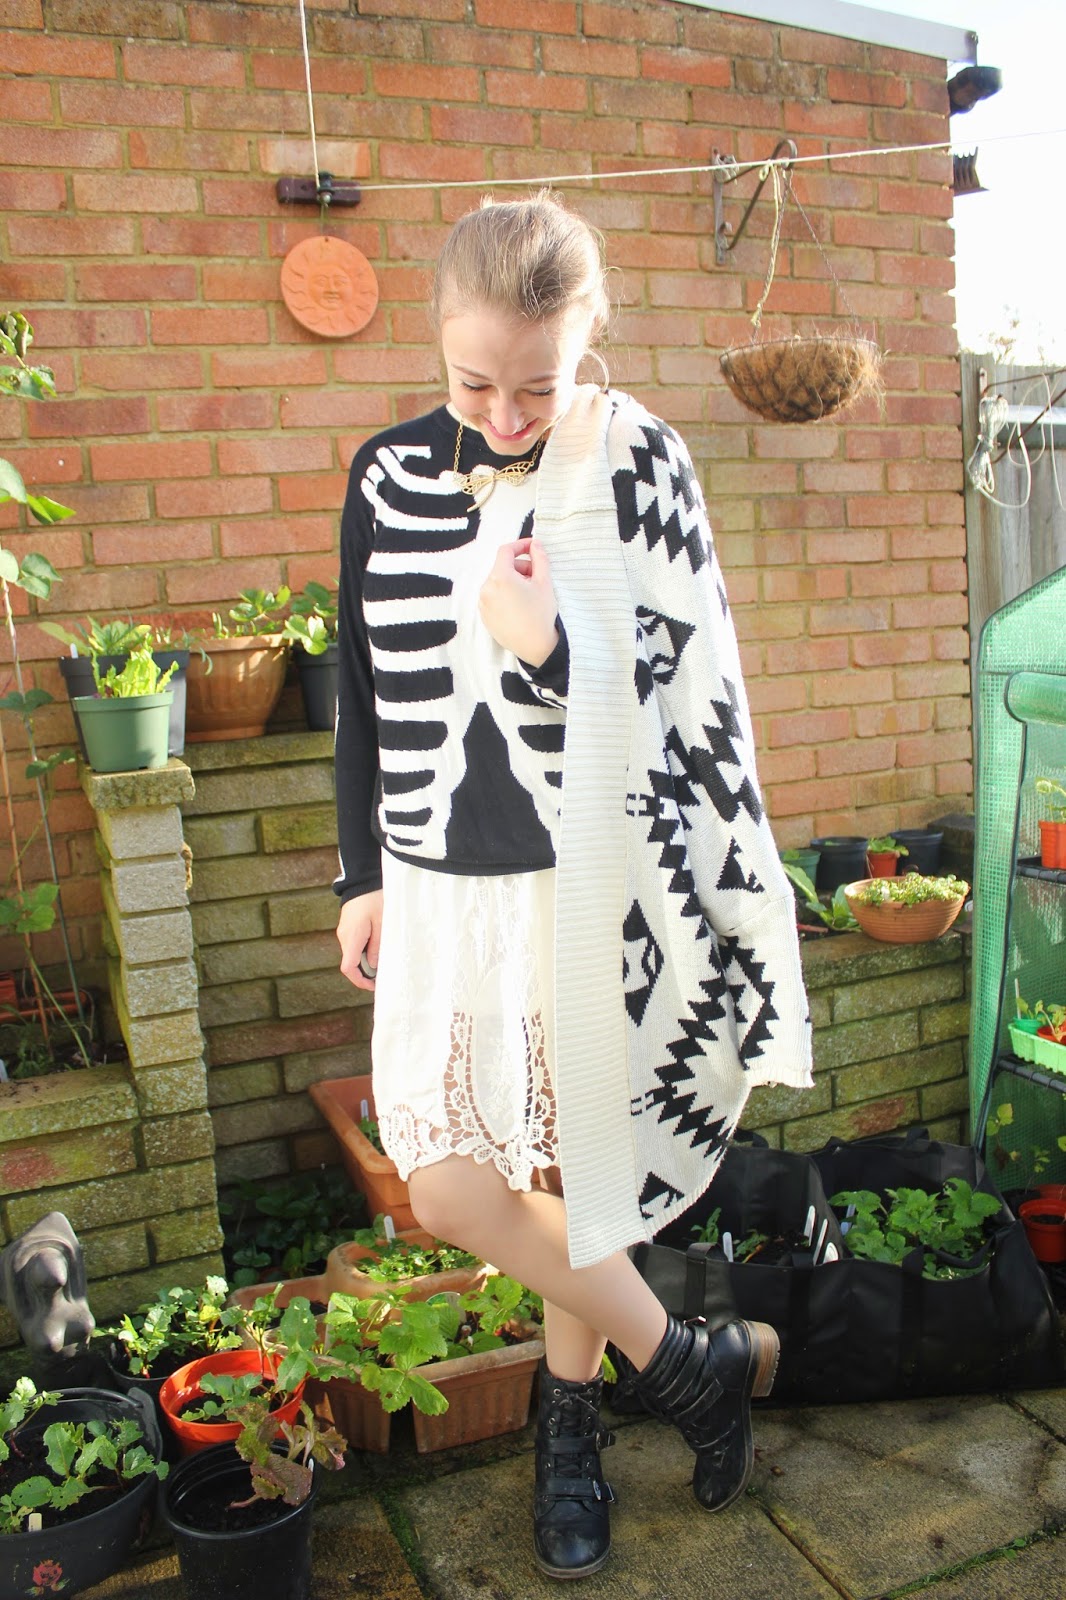 OOTD-blogger-fashion-outfit-inspiration-oasap-cardigan-aztec-print-jumper-skeleton-scarf-vintage-lace-skirt-ukele-boots-new-look-necklace-topshop-style-clothes